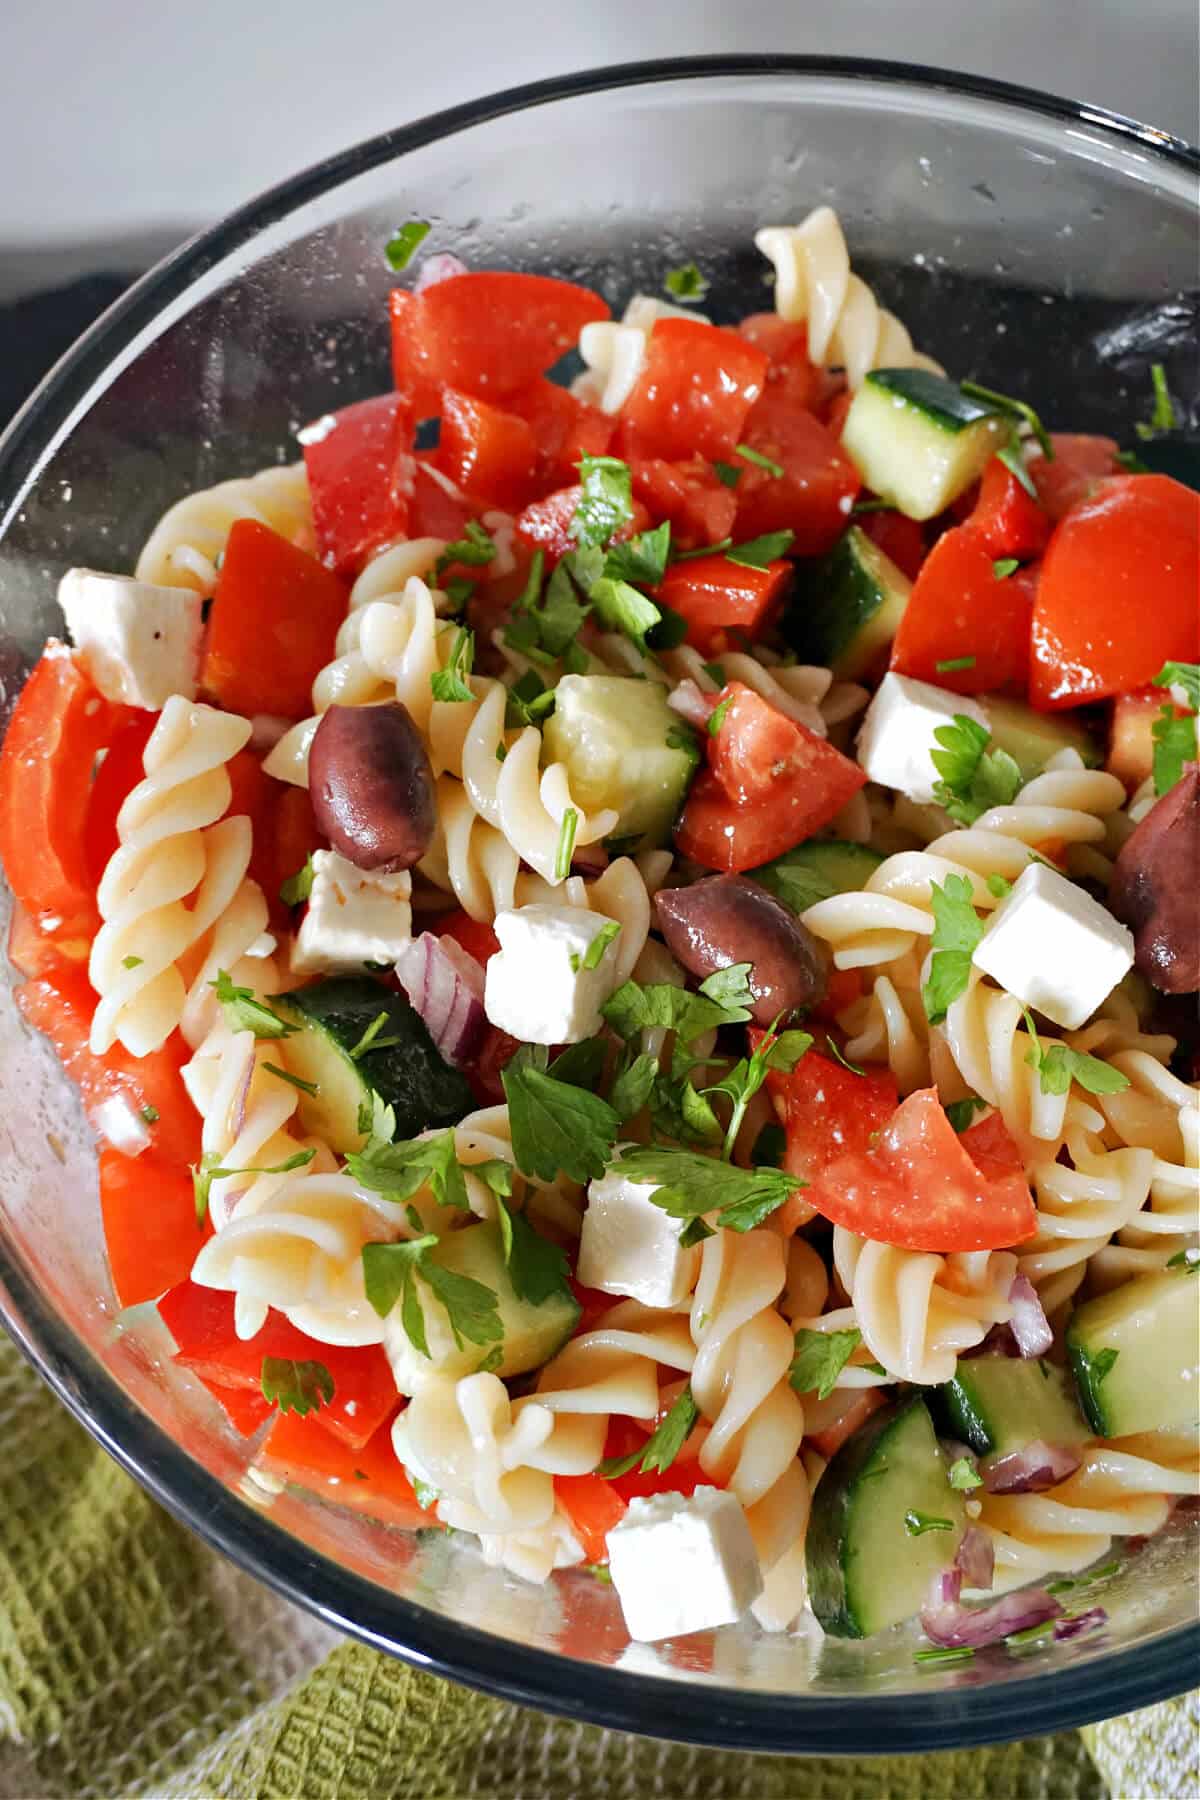 A bowl with pasta salad.